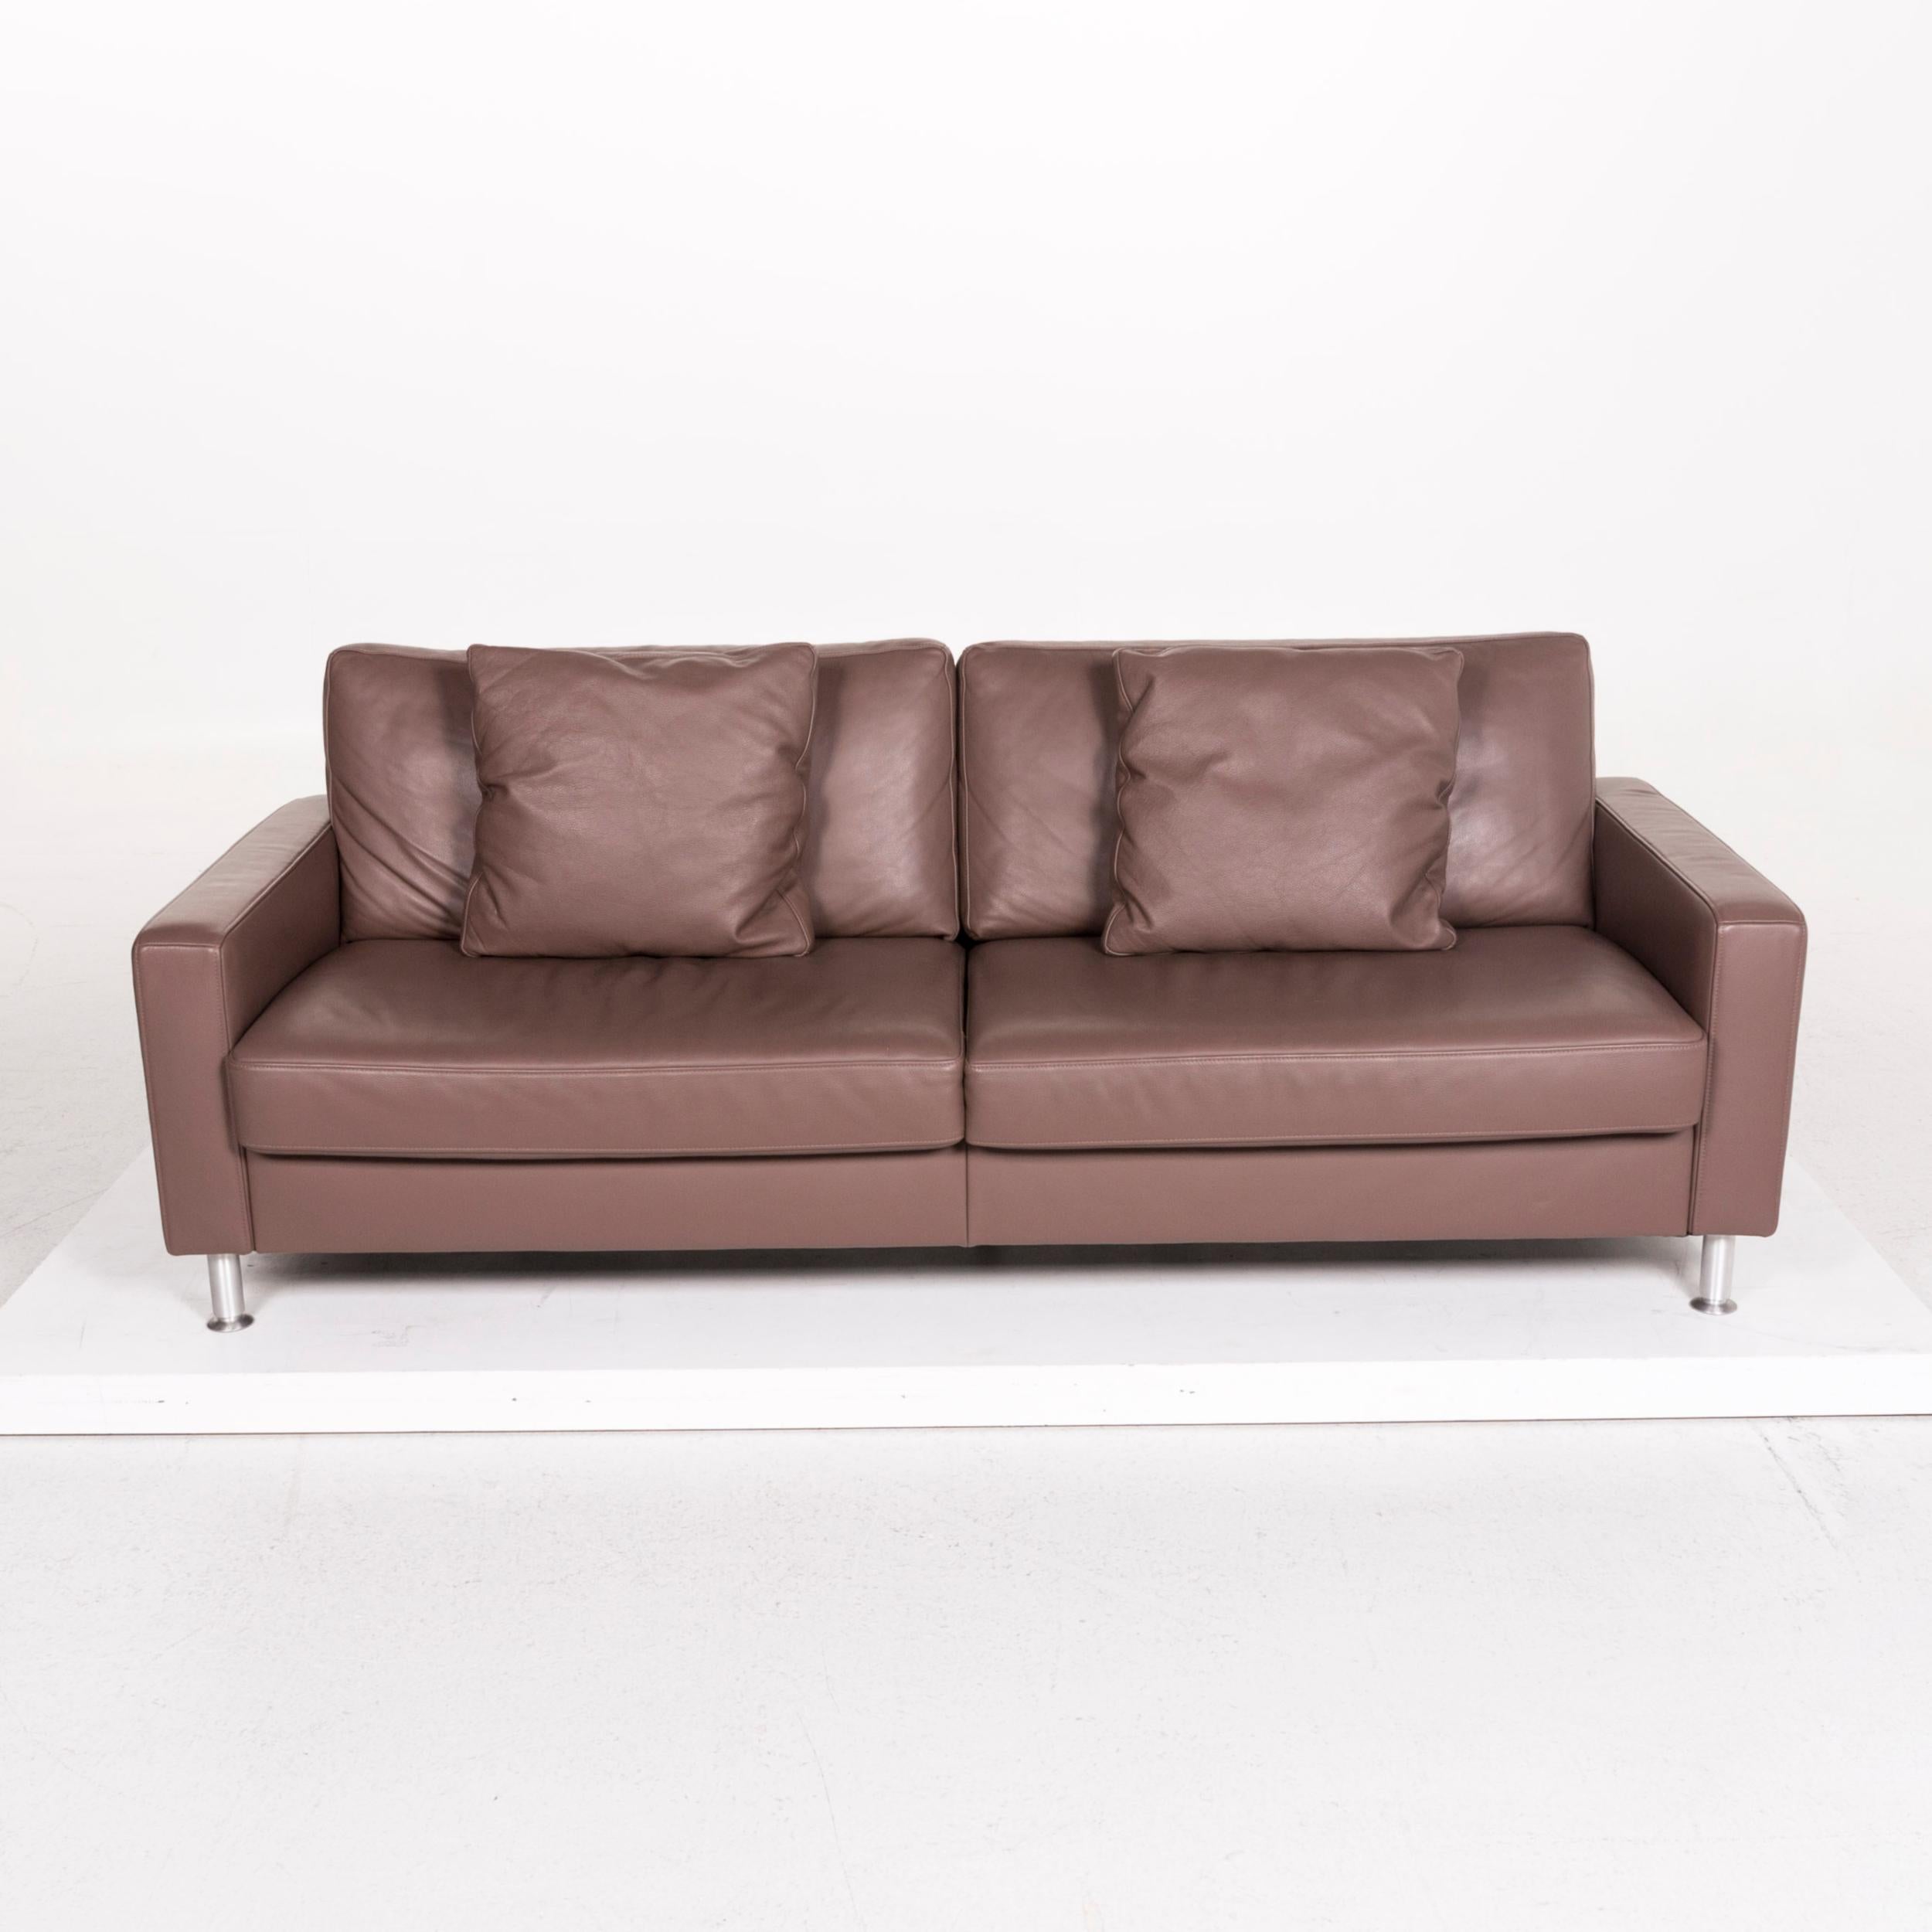 Ewald Schillig Leather Sofa Brown Three-Seat Couch In Good Condition For Sale In Cologne, DE